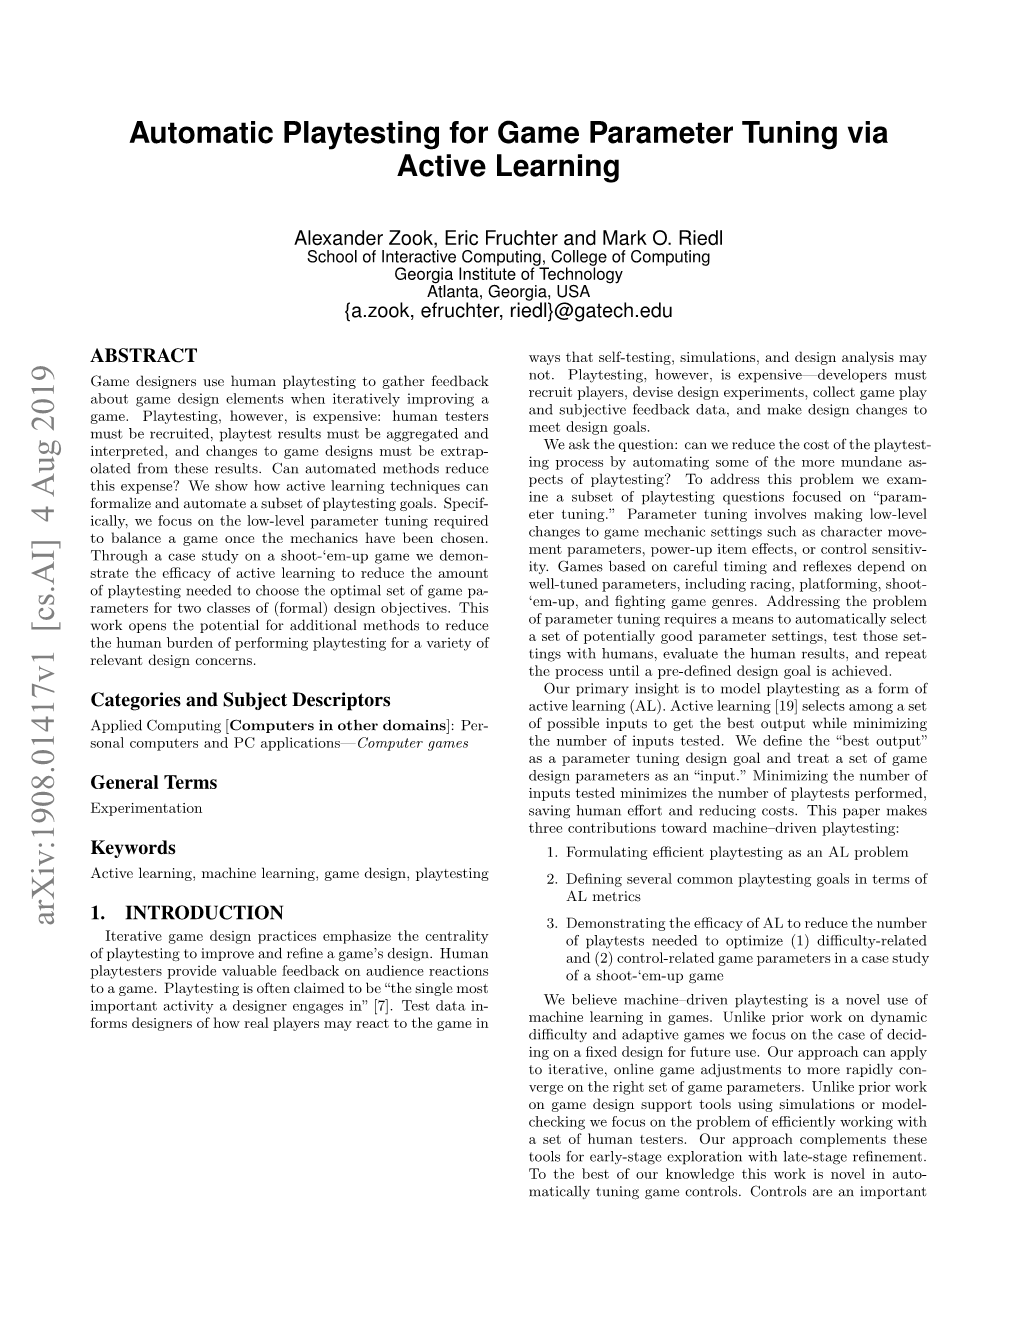 Automatic Playtesting for Game Parameter Tuning Via Active Learning